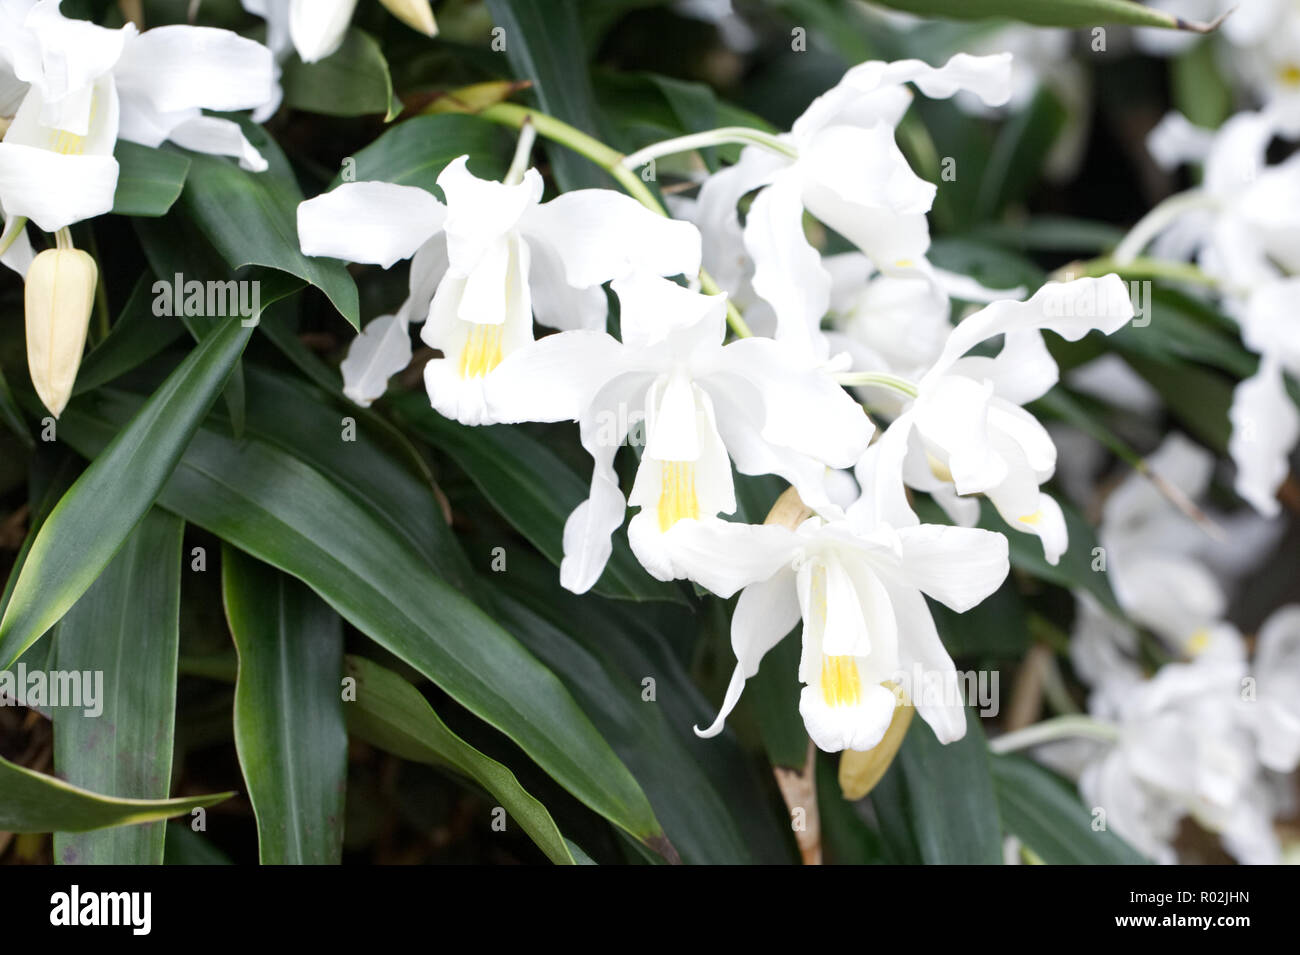 Coelogyne cristata var. lemoniana flowers growing in a protected environment. Stock Photo